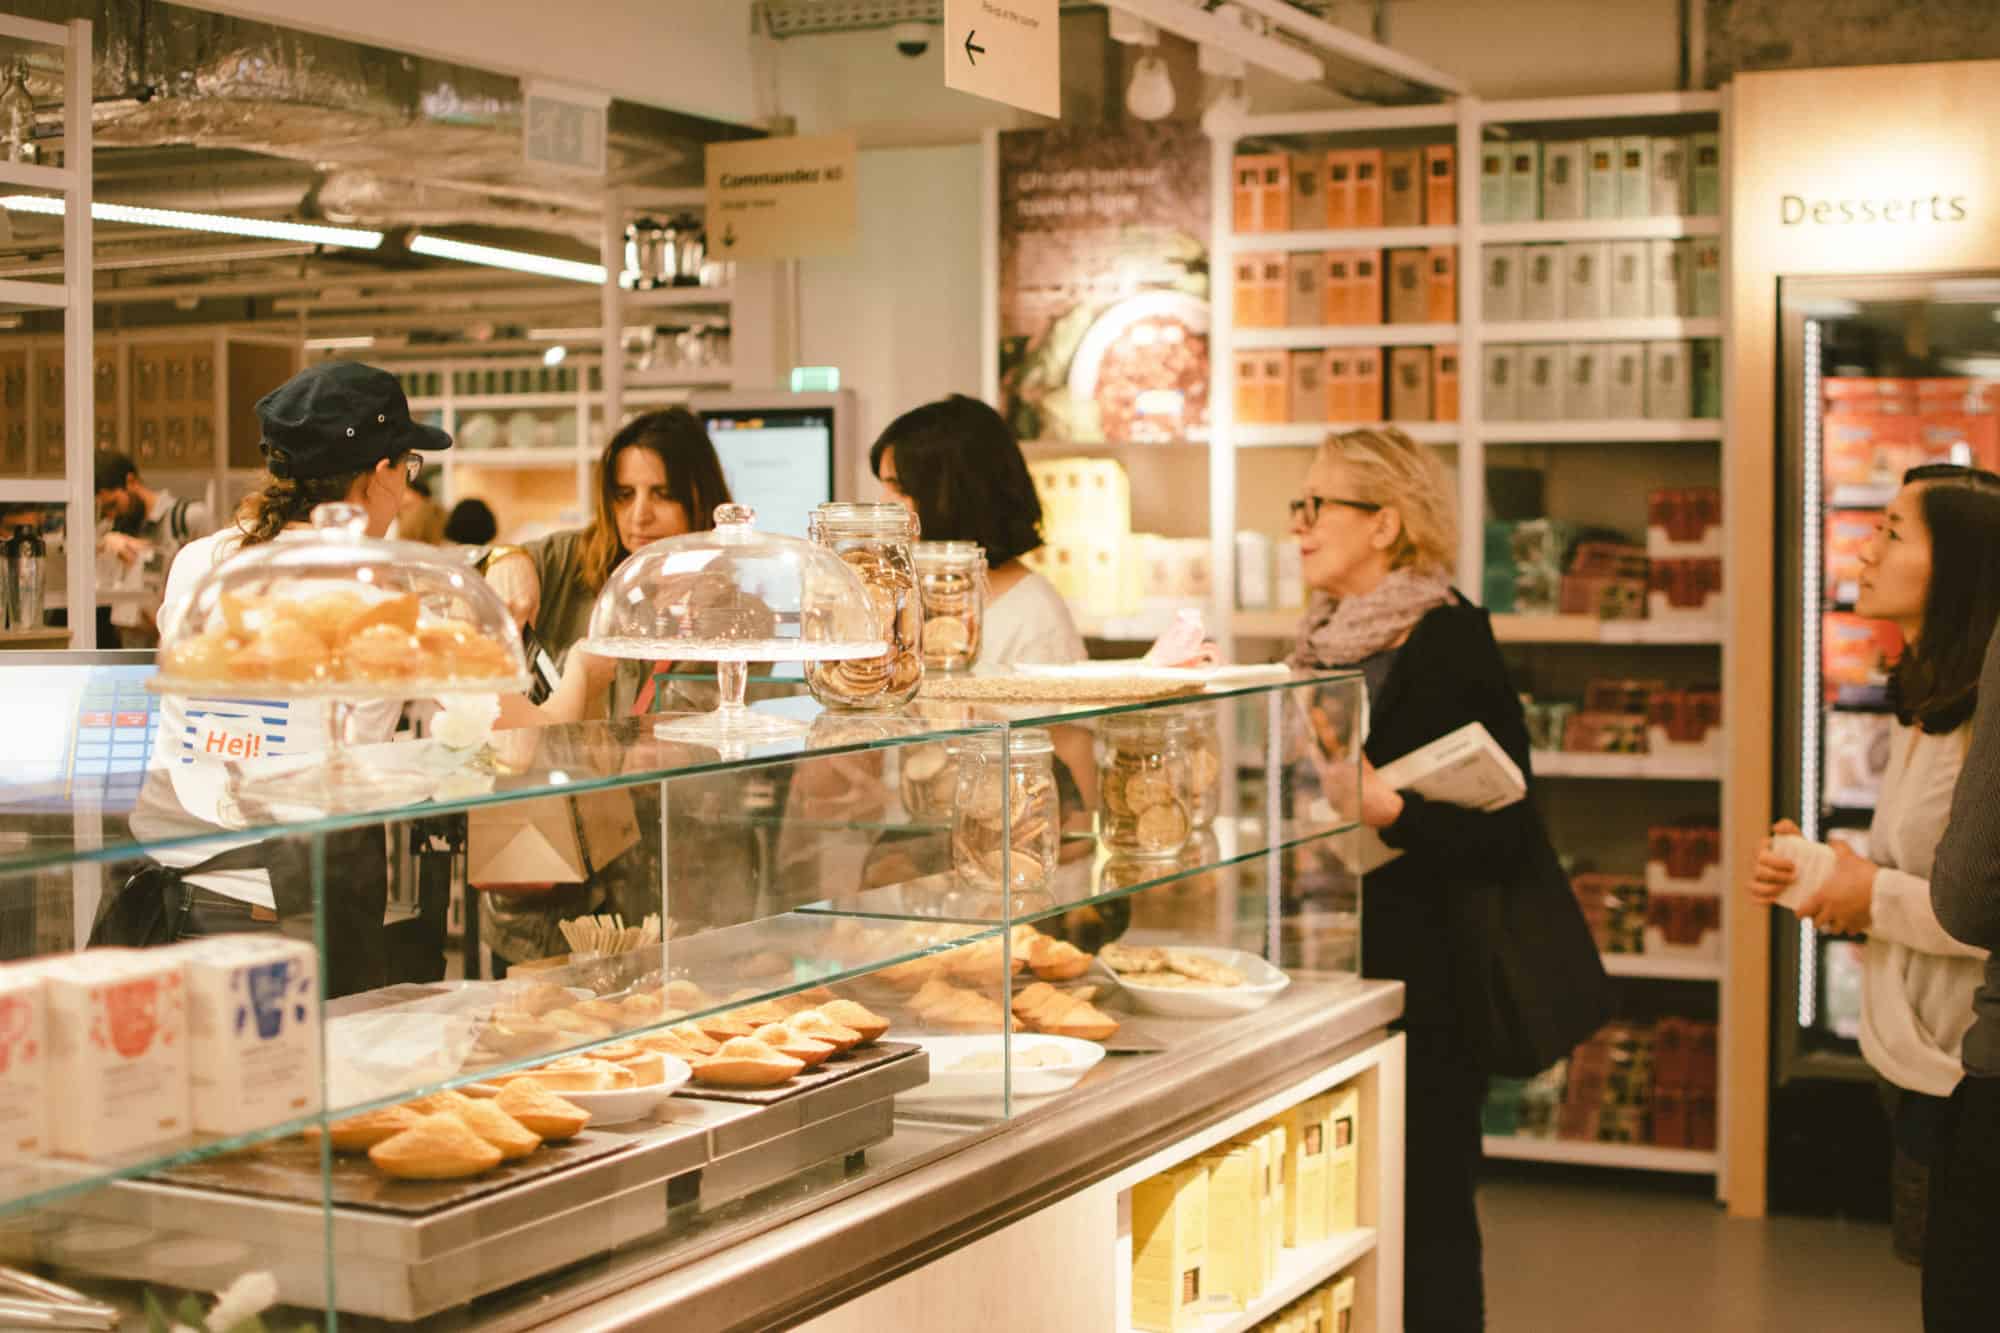 Customers waiting in line at the boulangerie counter at IKEA Paris La Madeleine